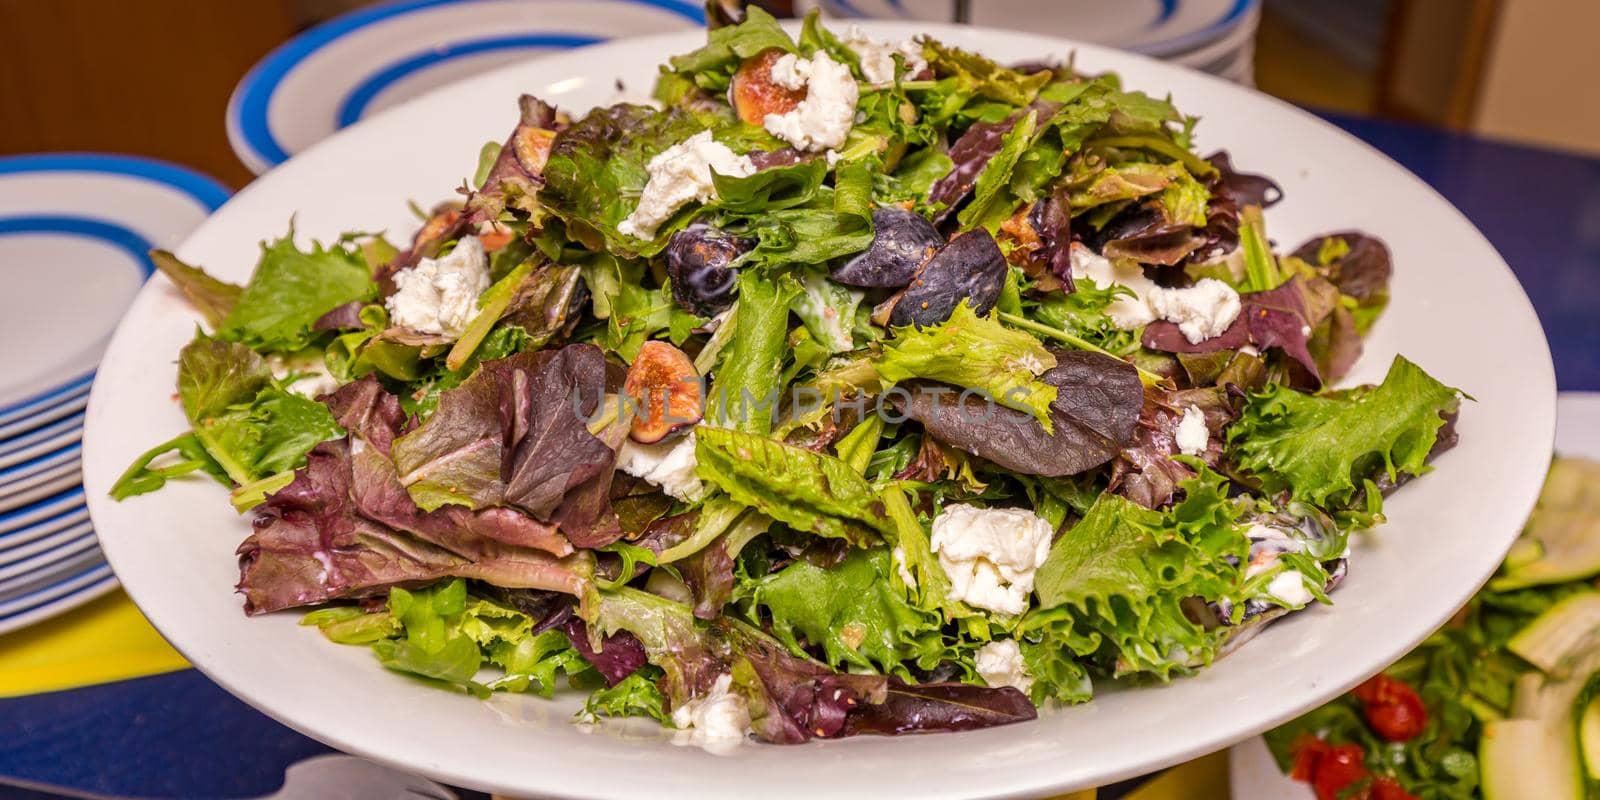 Green salad with fig and goat cheese, served on white plate